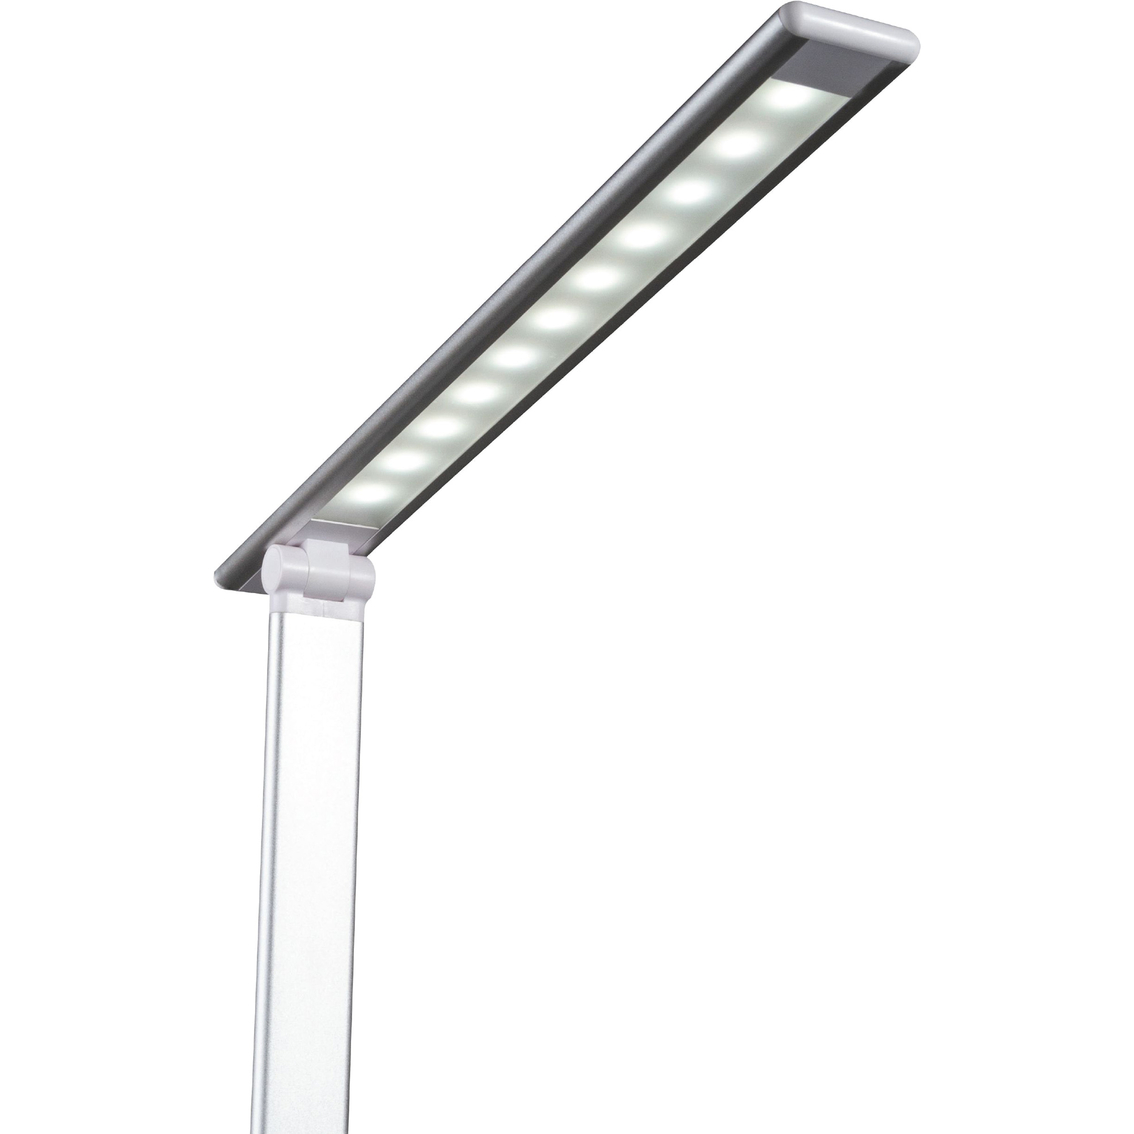 OttLite Entice LED Desk Lamp with Wireless Charging - Image 6 of 7